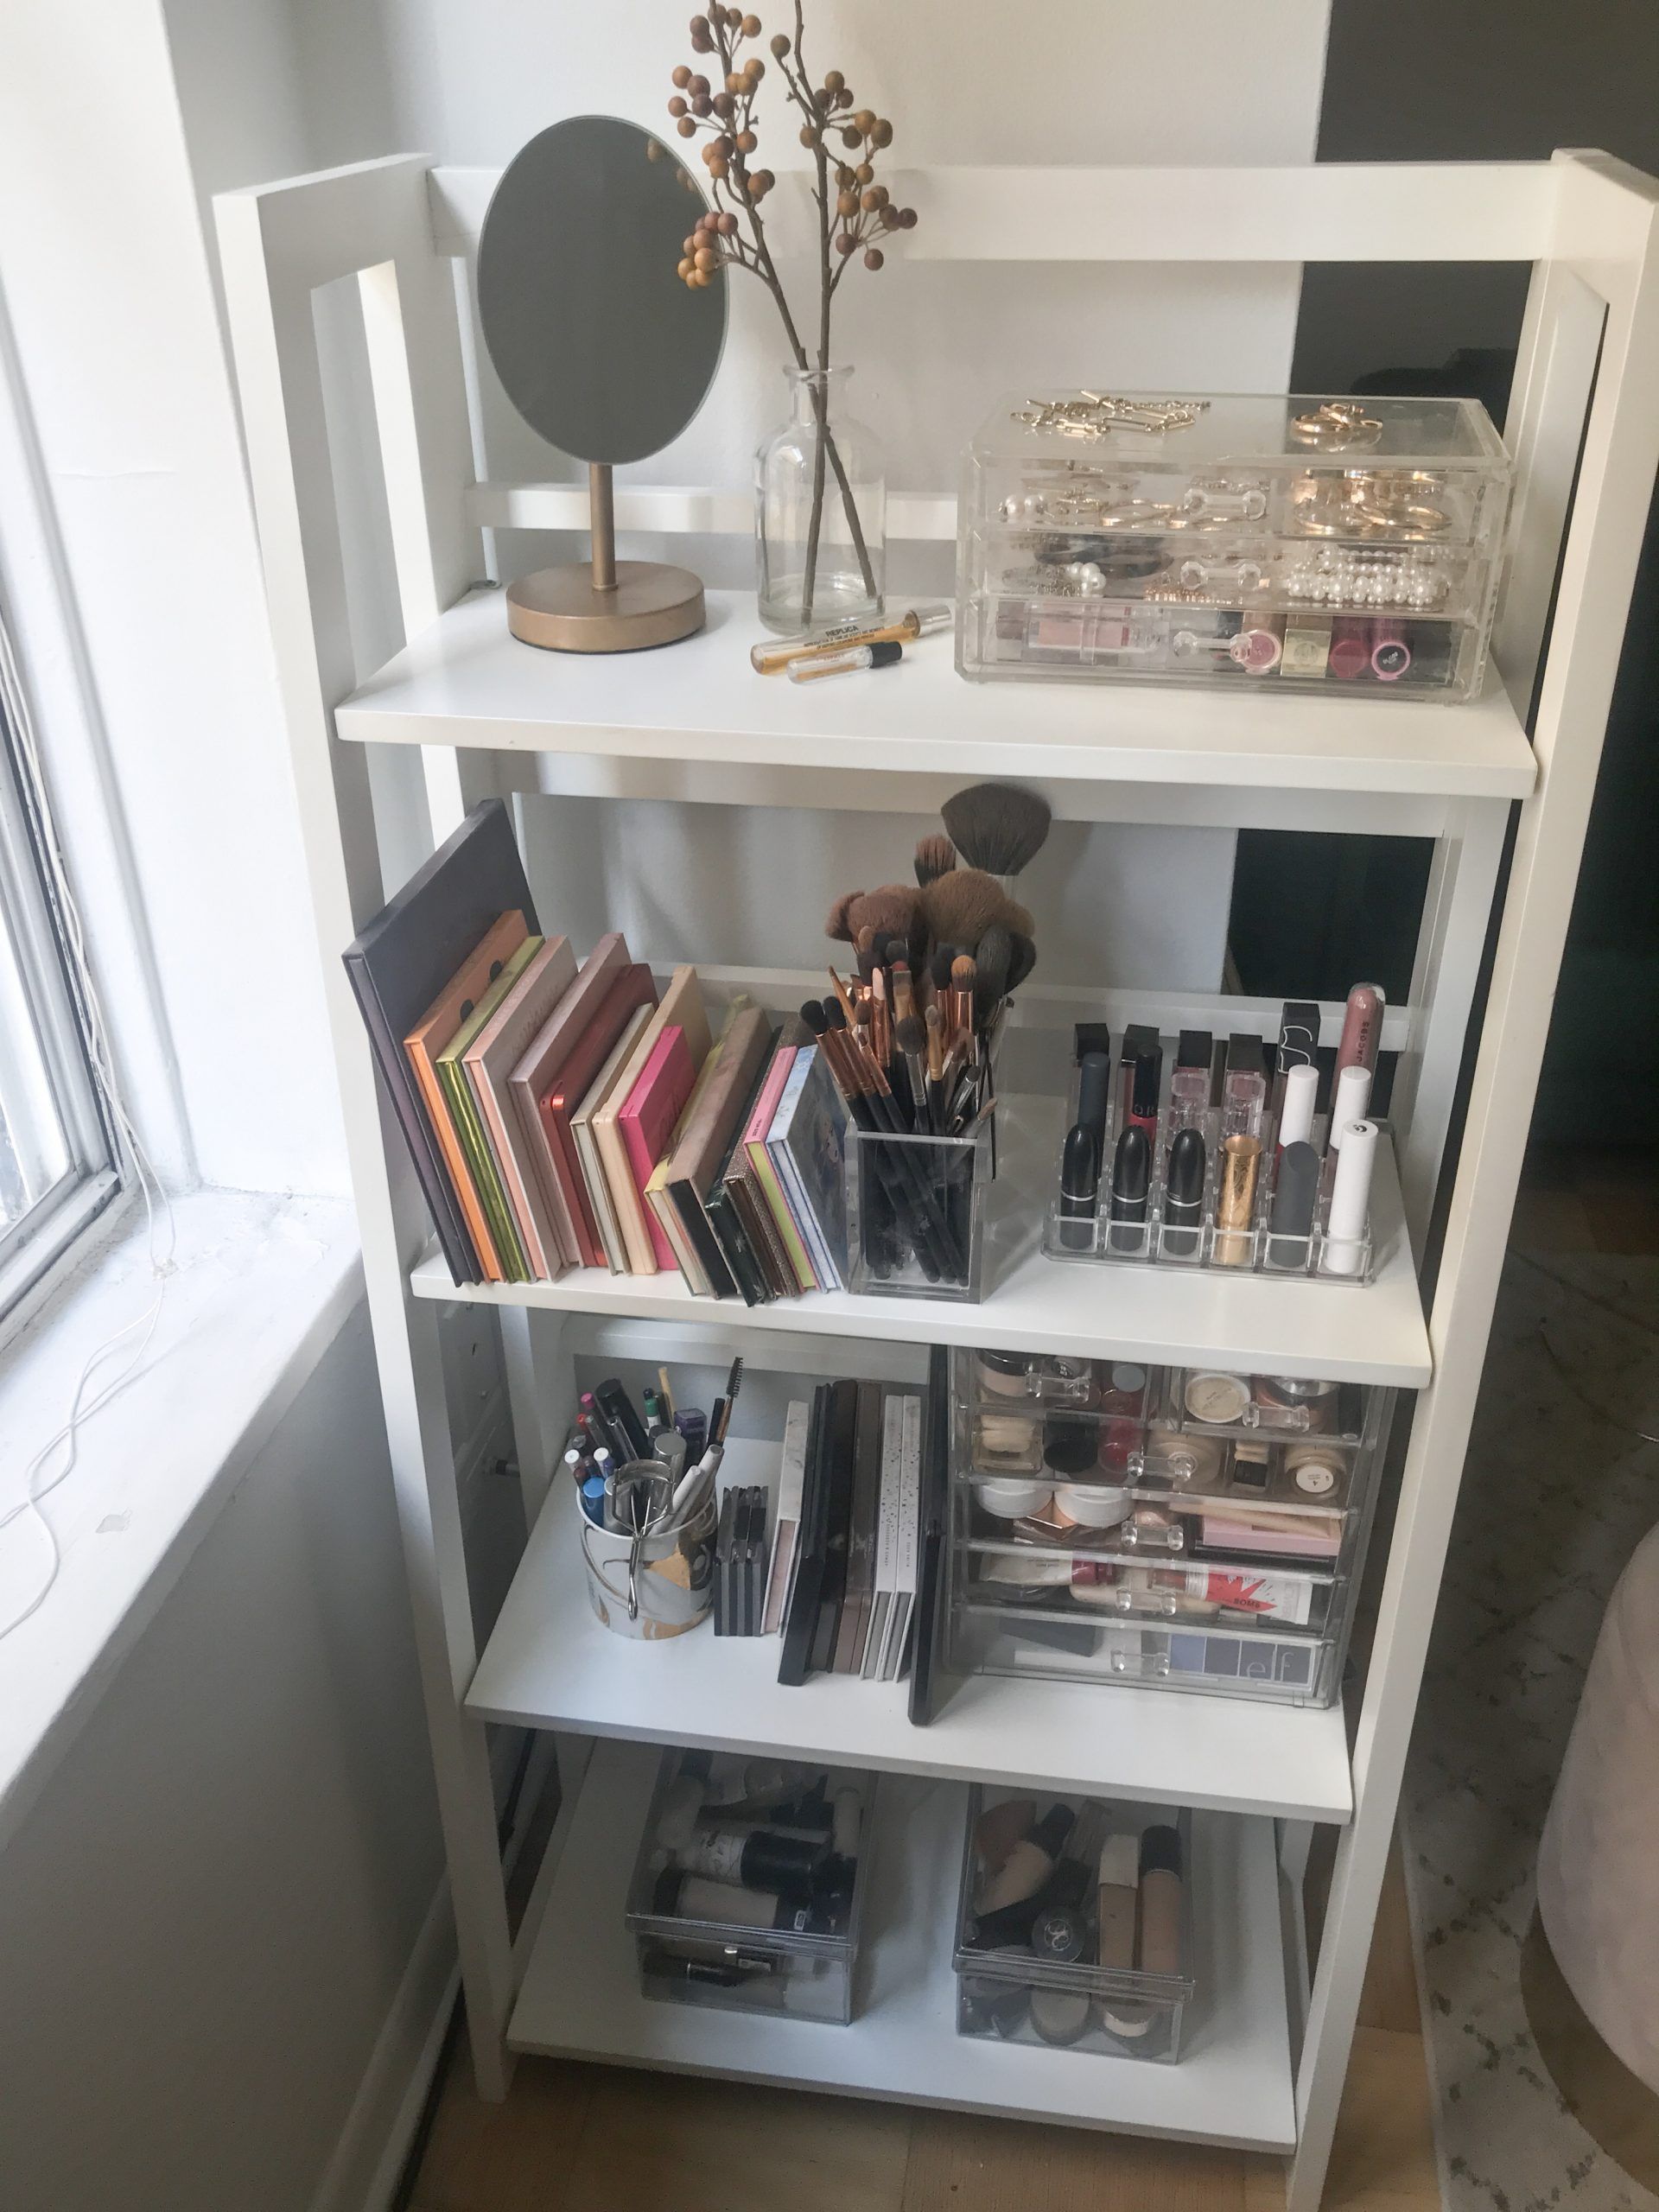 How I Decluttered and Organized My Makeup Stash - How I Decluttered and Organized My Makeup Stash -   18 beauty Room organization ideas